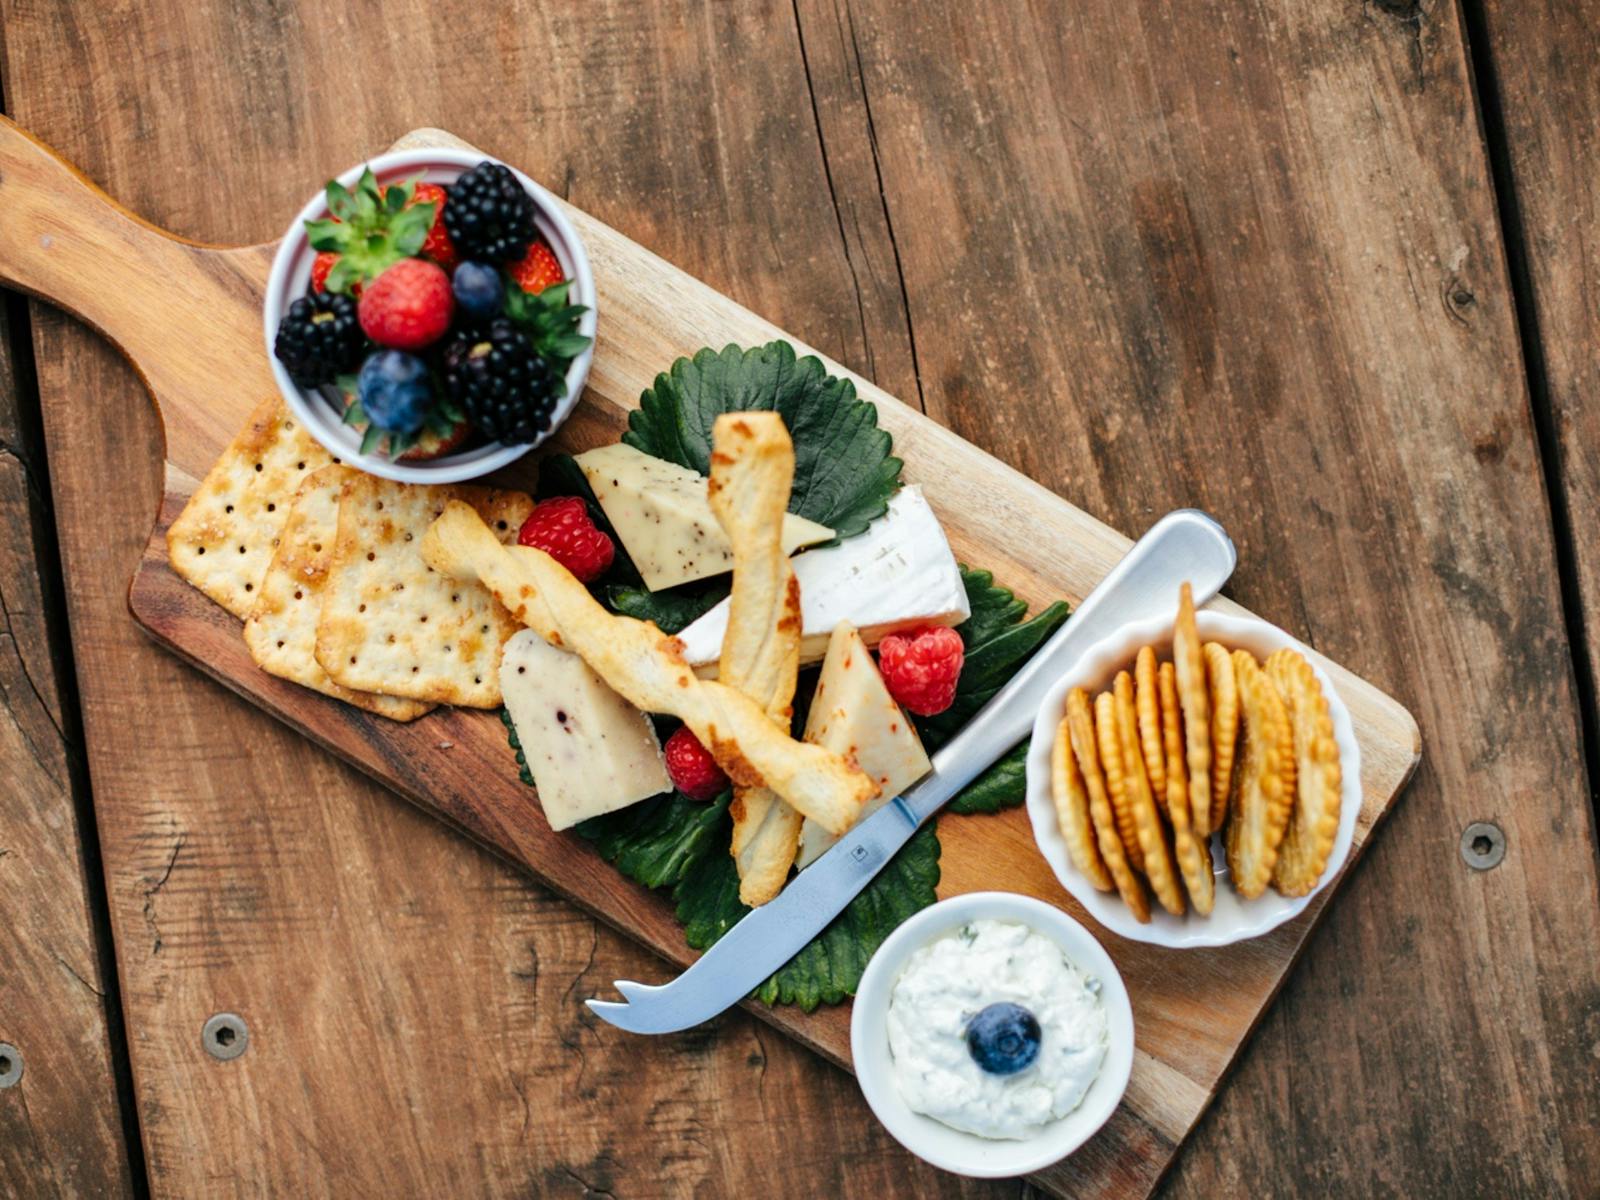 A cheese board with local cheeses and Hillwood berries.